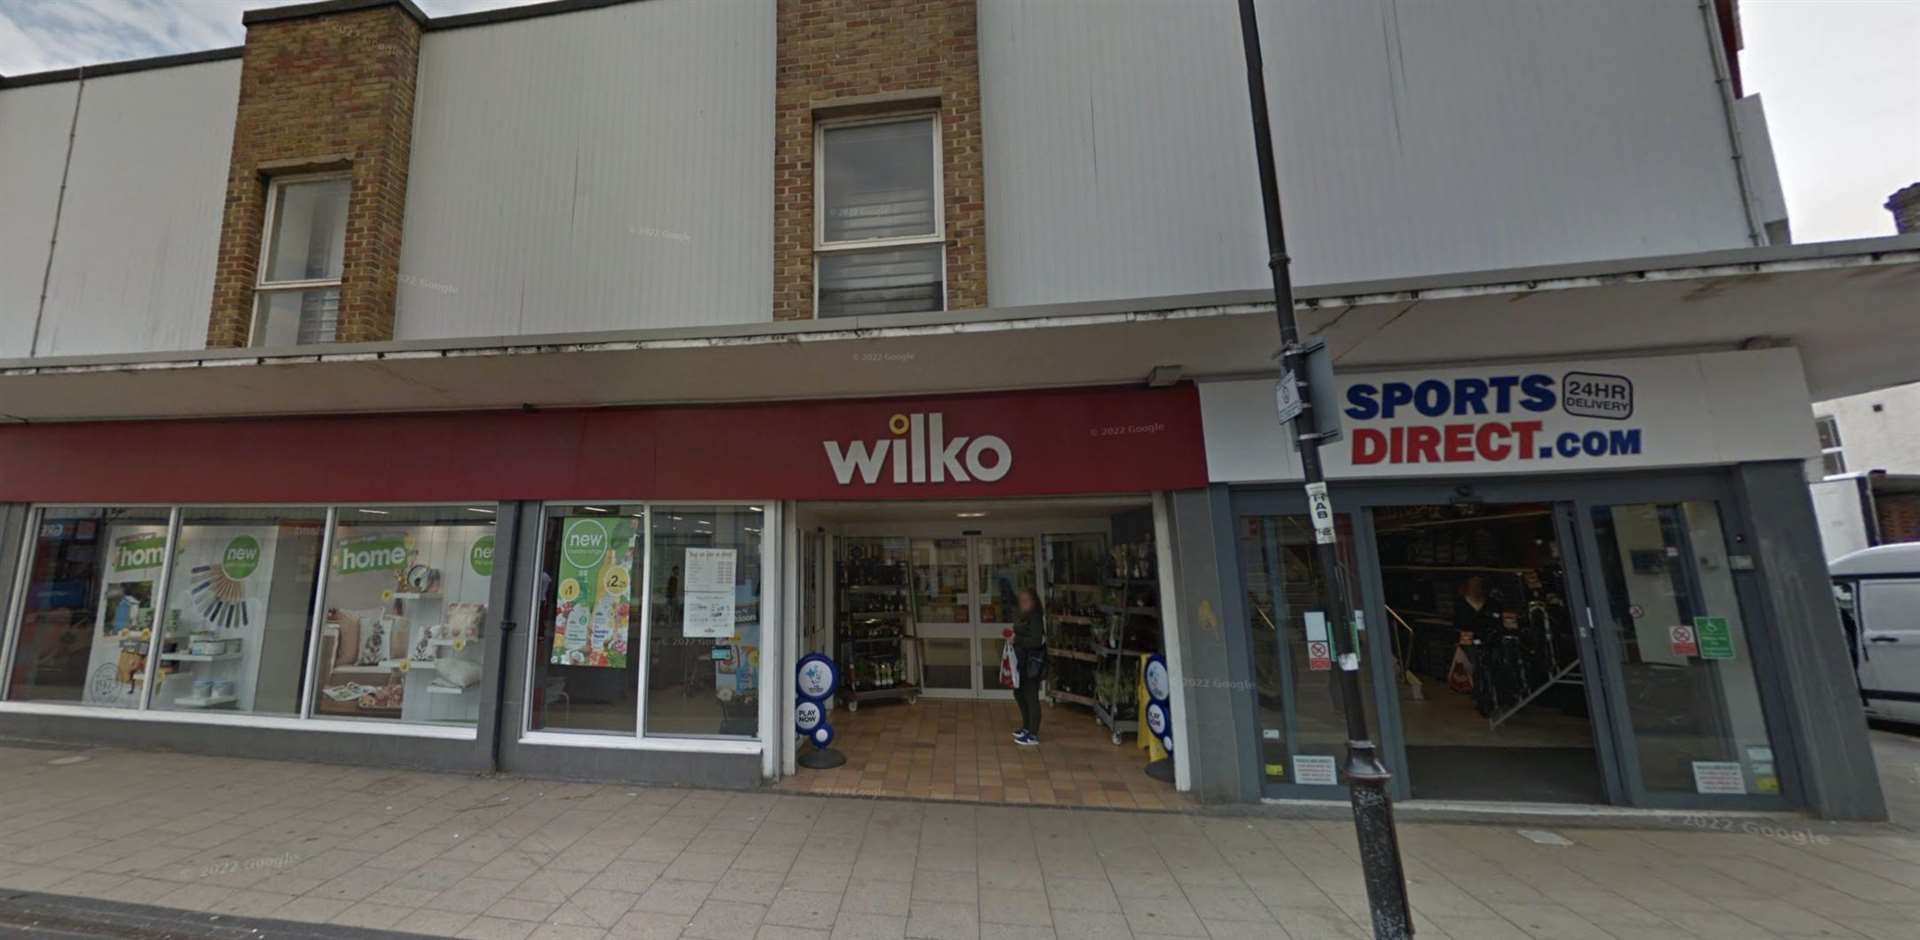 Gillingham Wilko is a stone's throw away from the train station